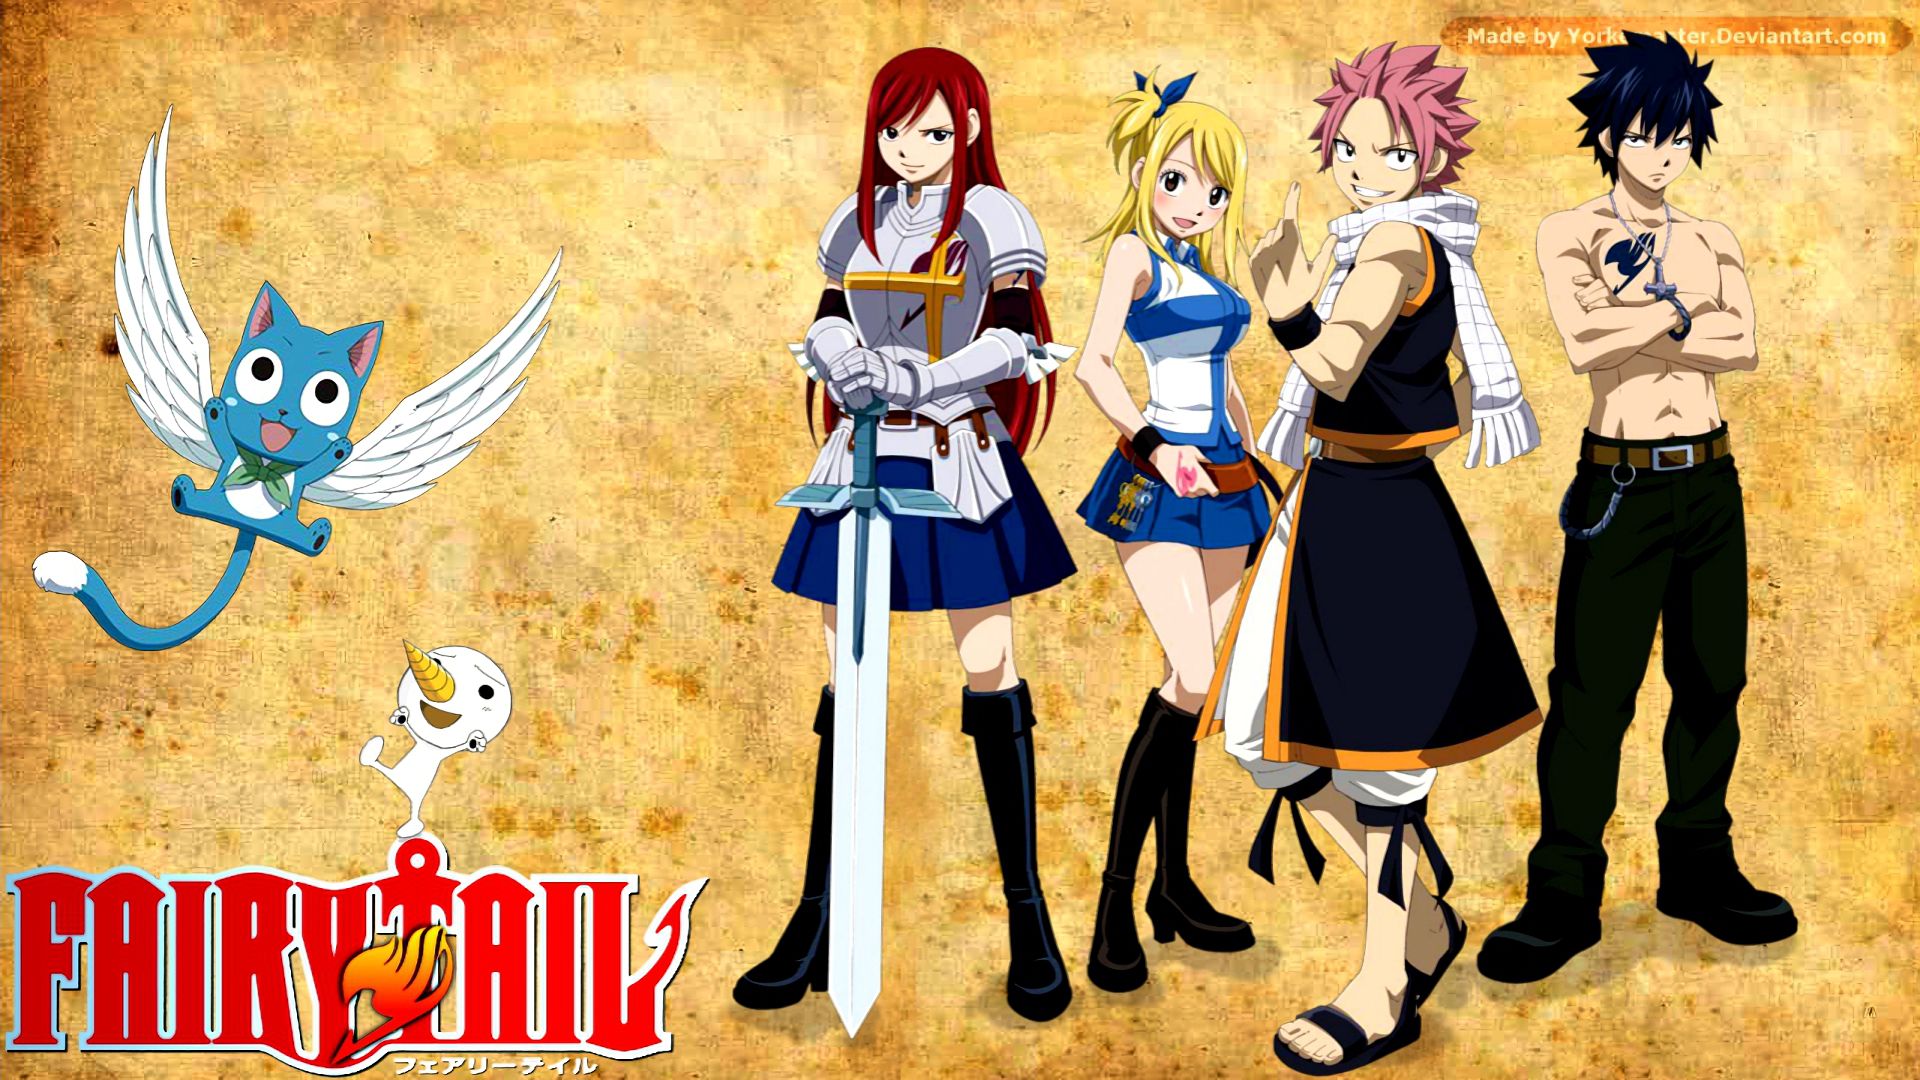 100+] Fairy Tail Iphone Wallpapers | Wallpapers.com